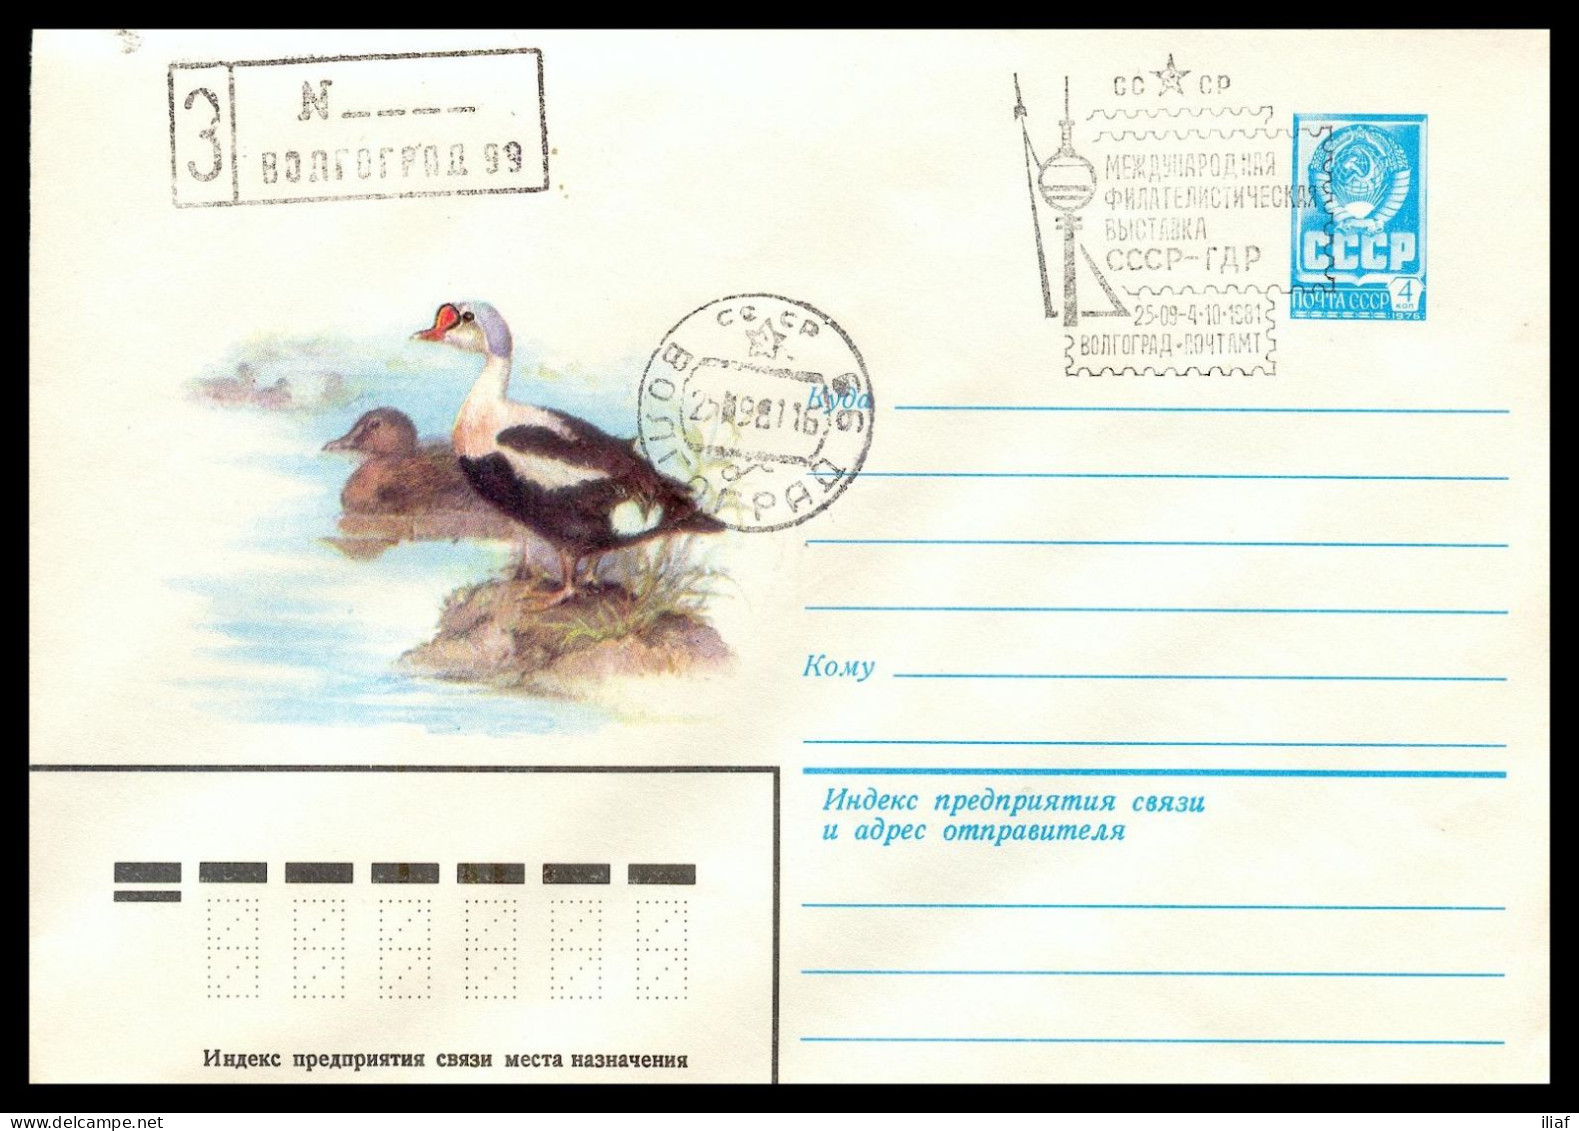 RUSSIA & USSR International Philatelic Exhibition “USSR-GDR” Volgograd-81 Illustrated Envelope With Special Cancellation - Expositions Philatéliques